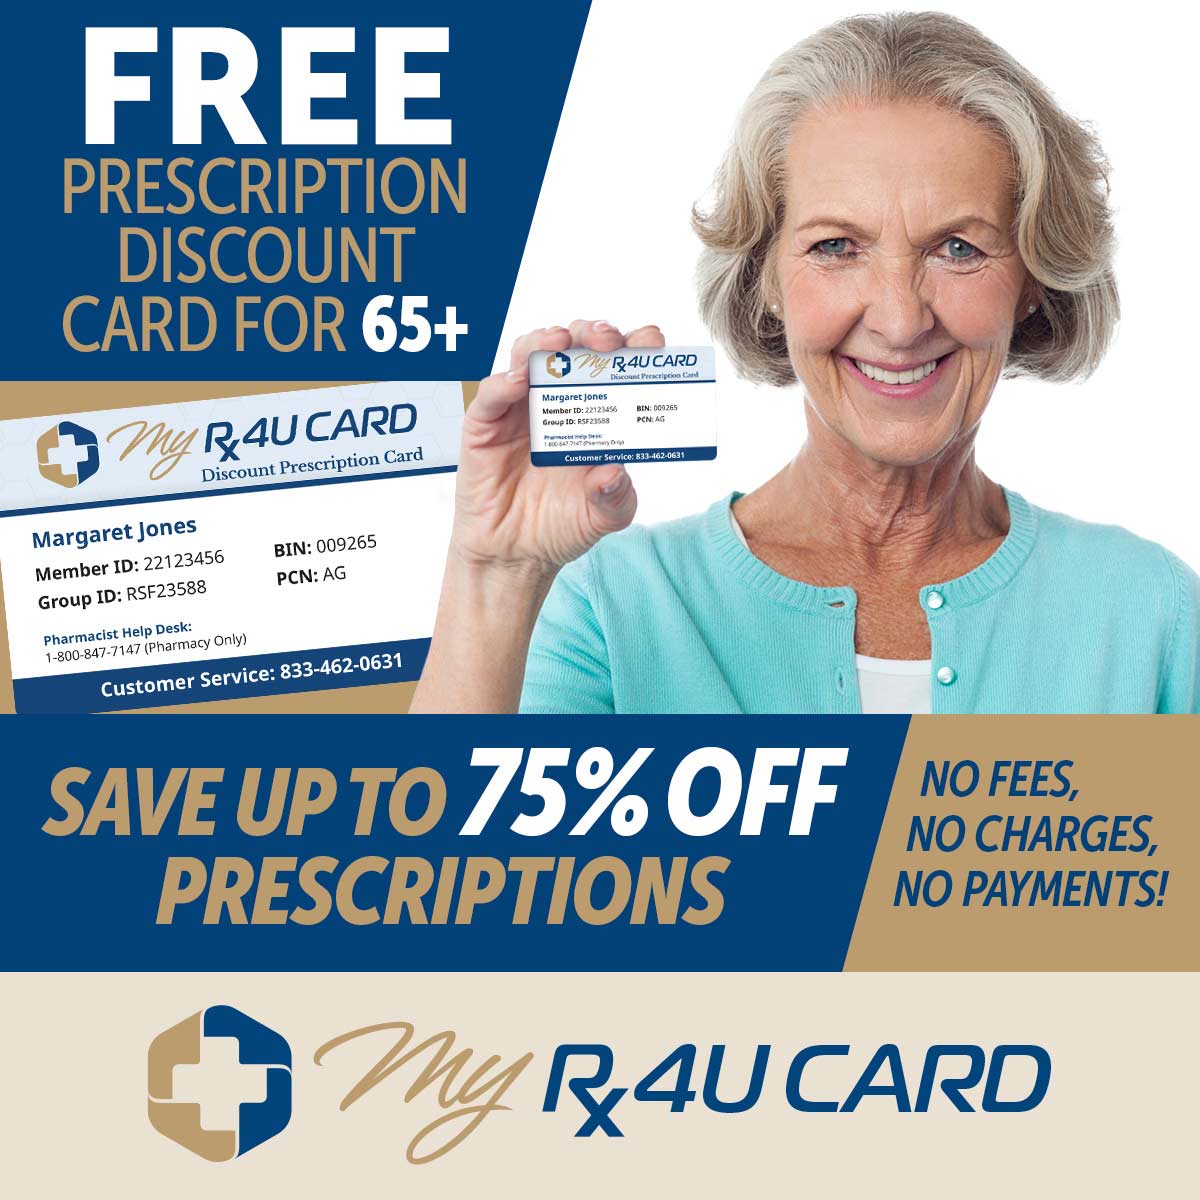 Free prescription discount card for 65+. Save up to 75% off prescriptions. No Fees, No Charges and No Payments. MyRX4U Card.